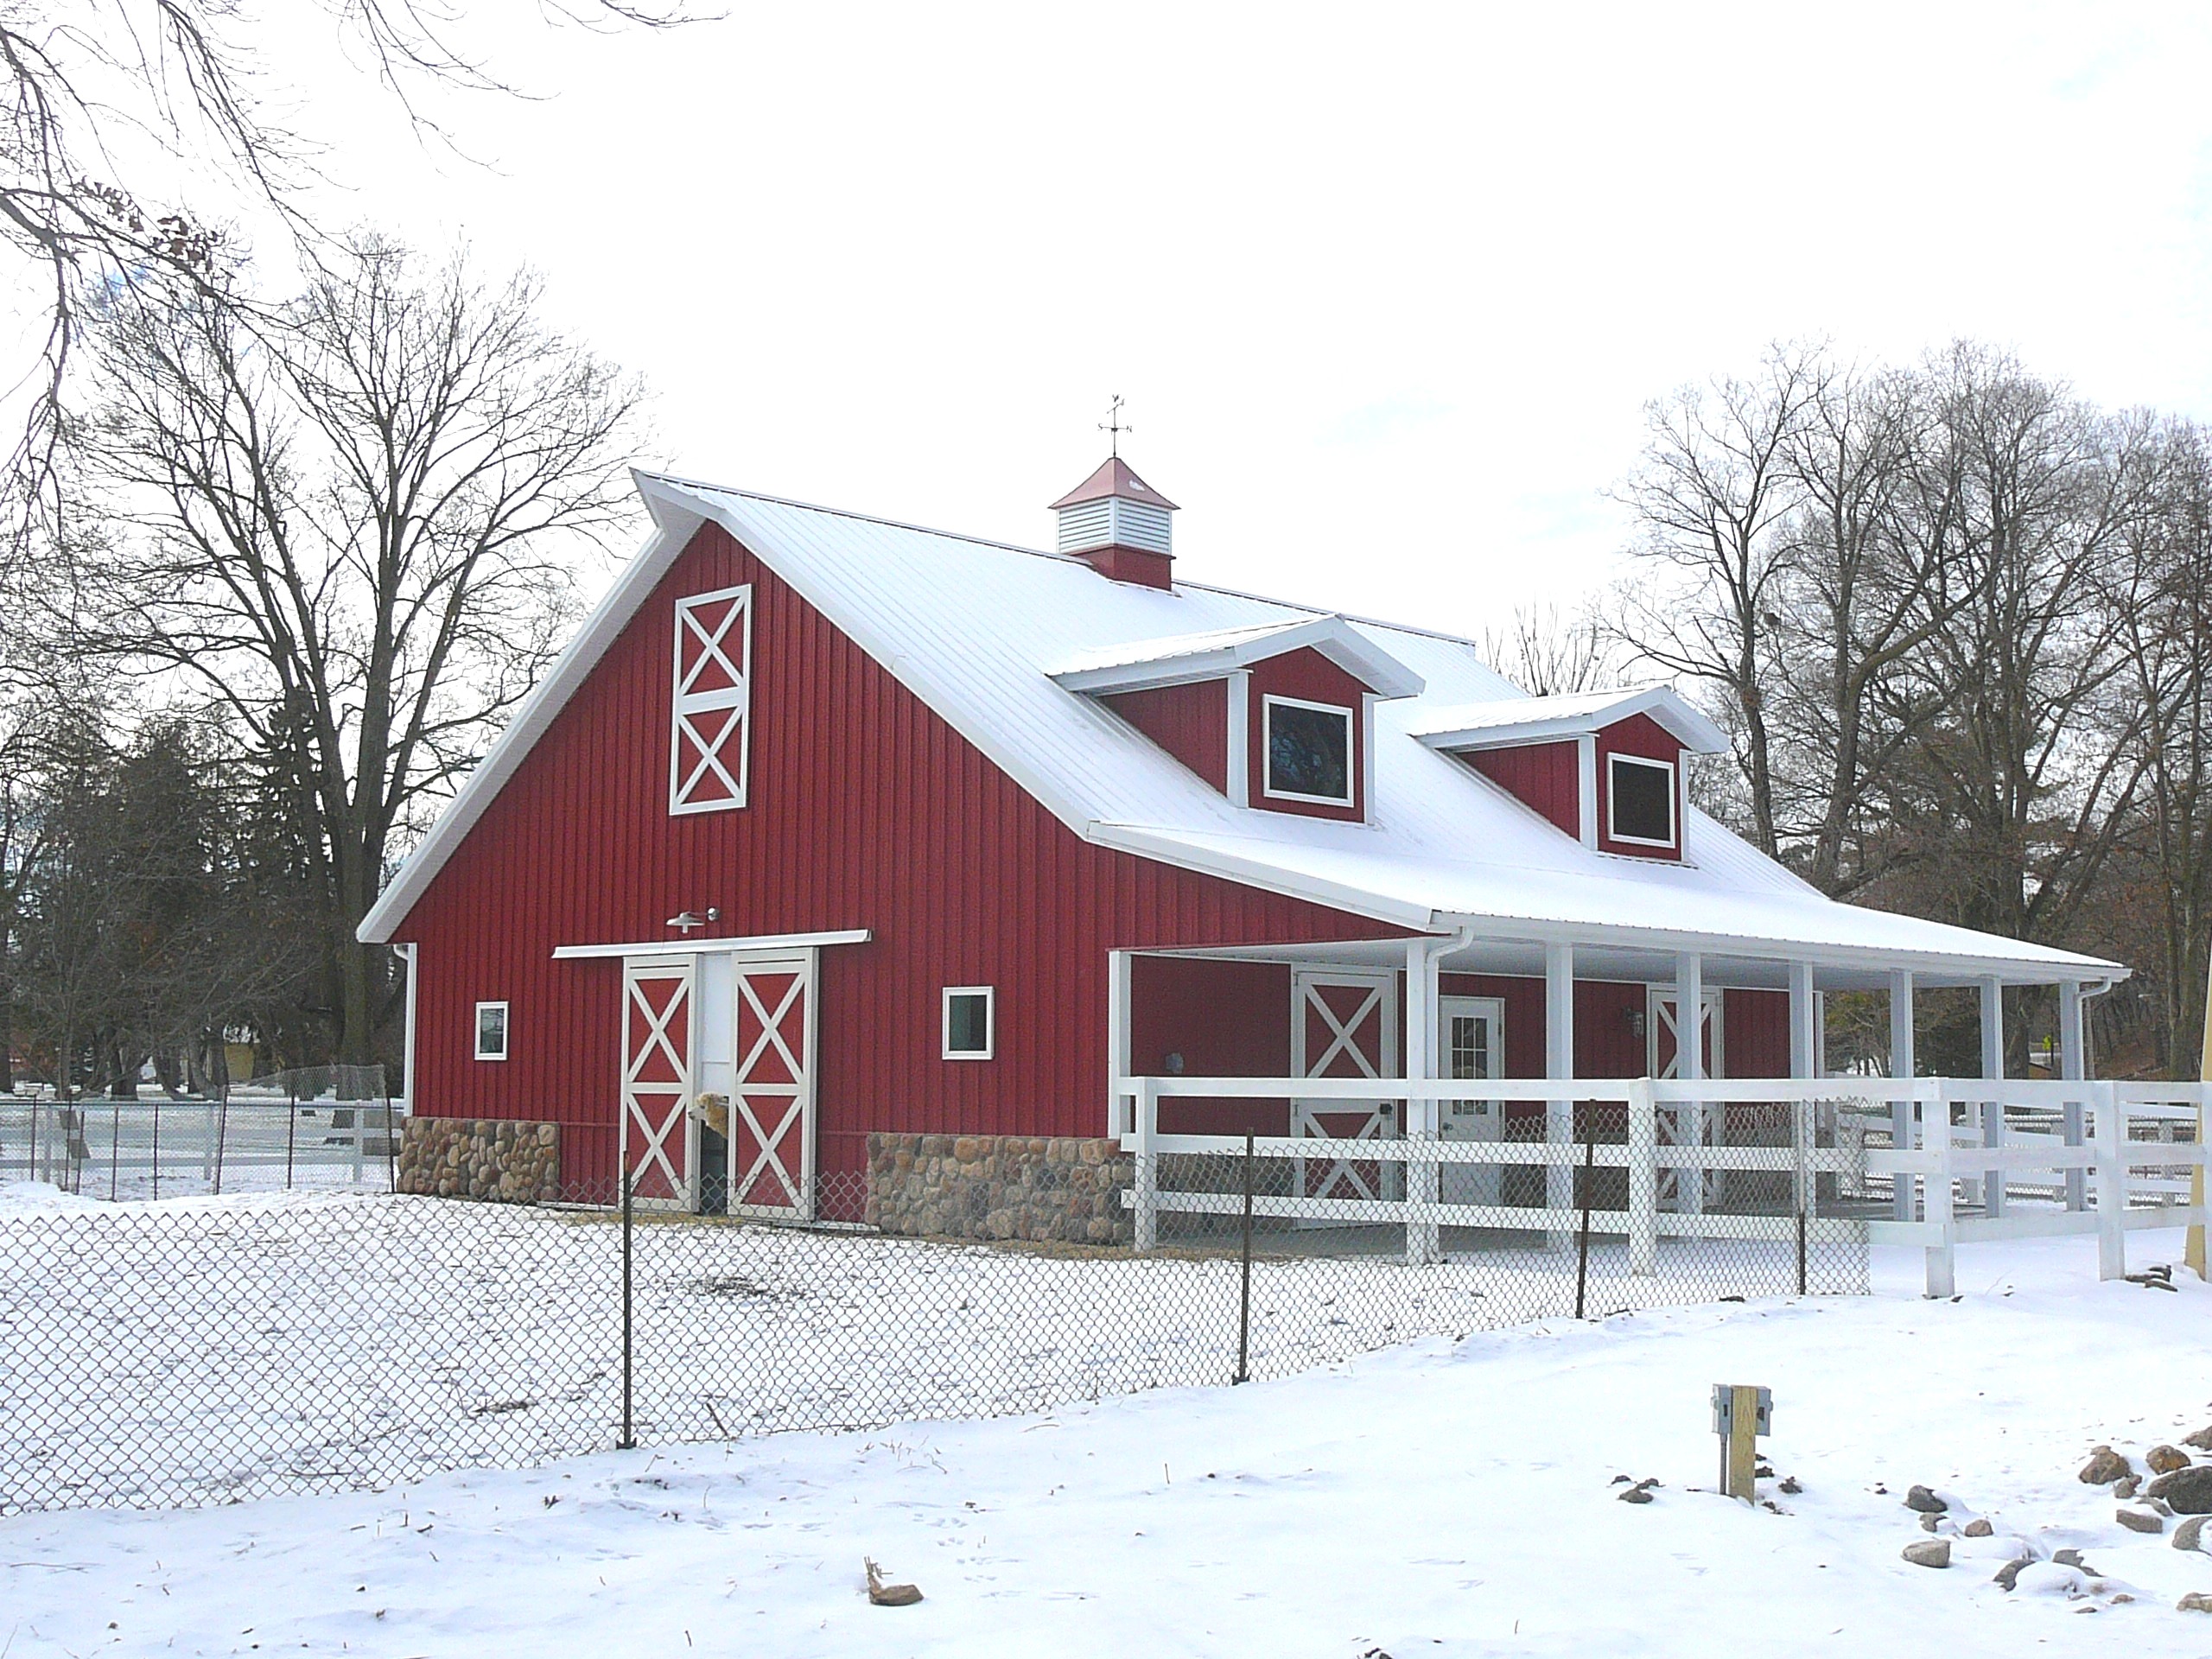 Blizzards - How to prep your horse barn for winter.